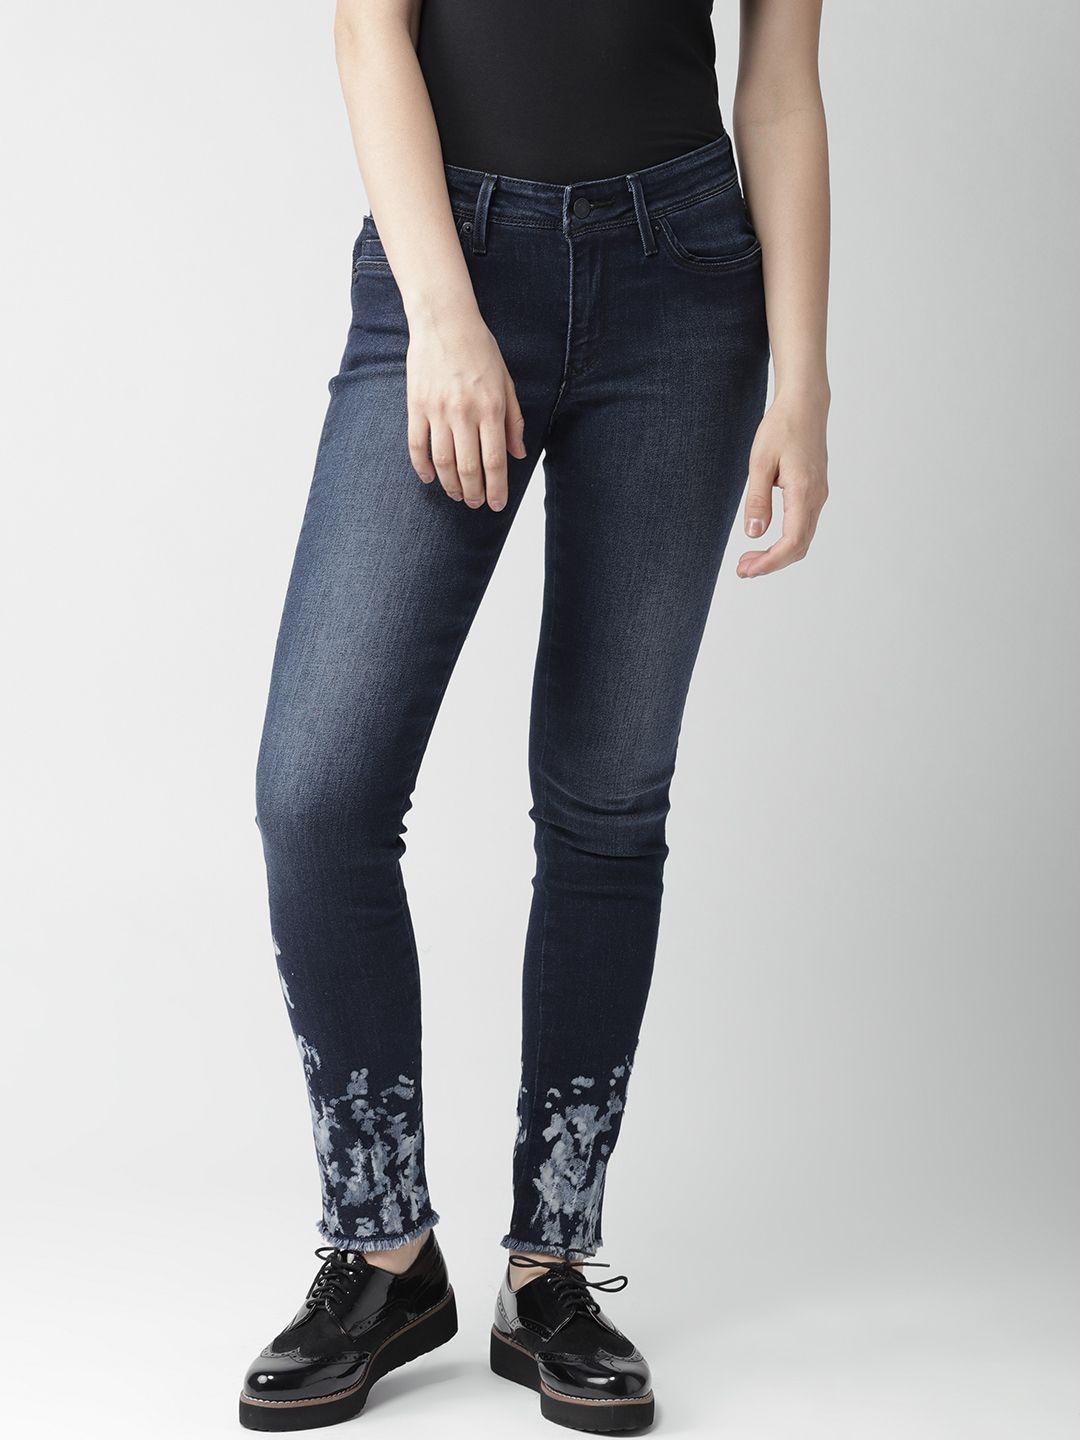 levis-women-navy-blue-skinny-fit-mid-rise-clean-look-stretchable-jeans-711